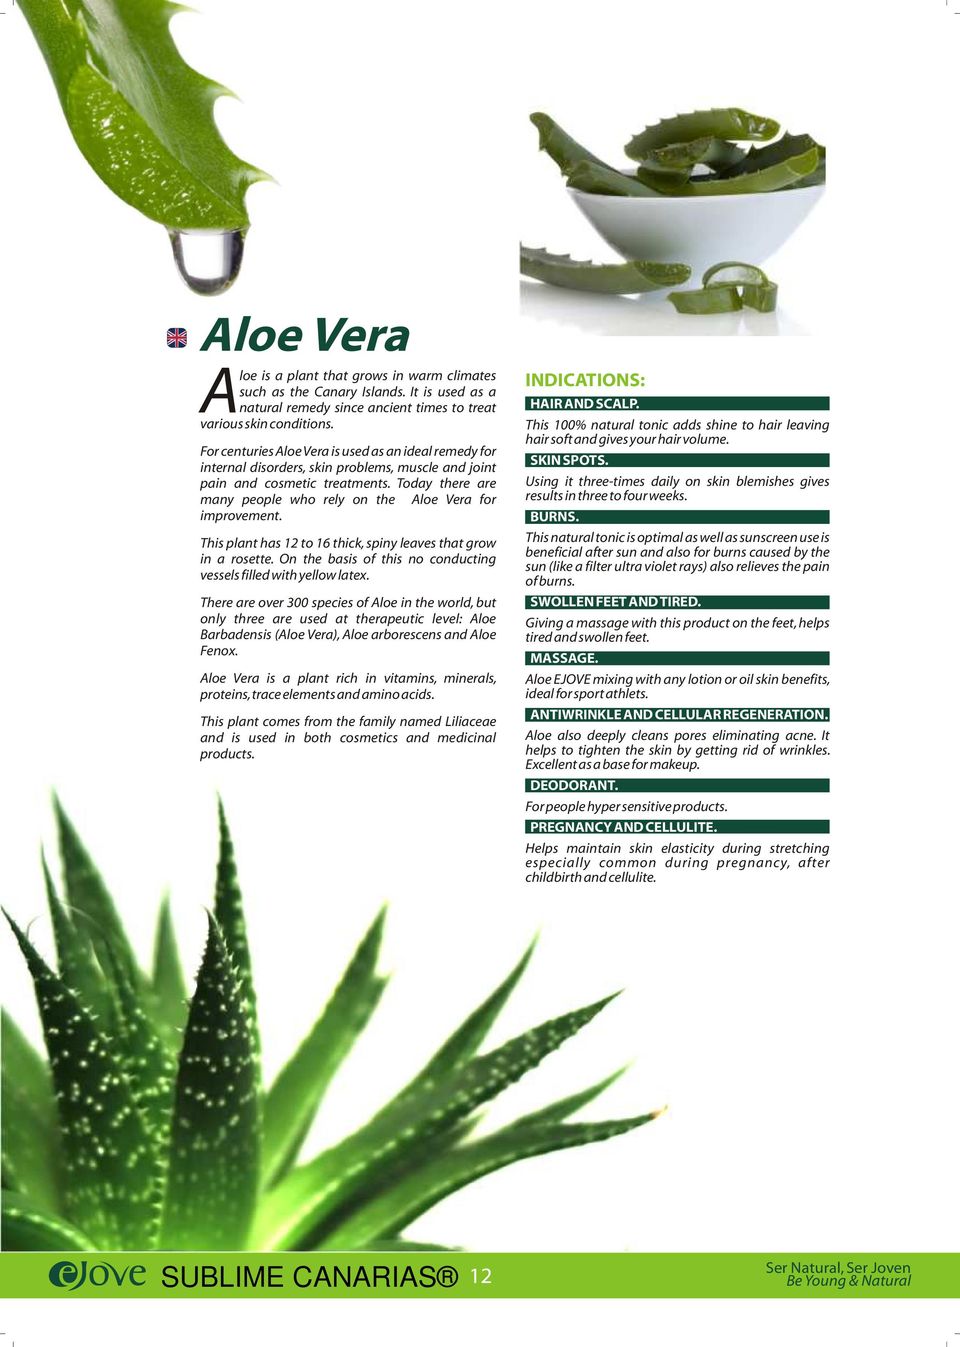 Today there are many people who rely on the Aloe Vera for improvement. This plant has 12 to 16 thick, spiny leaves that grow in a rosette.